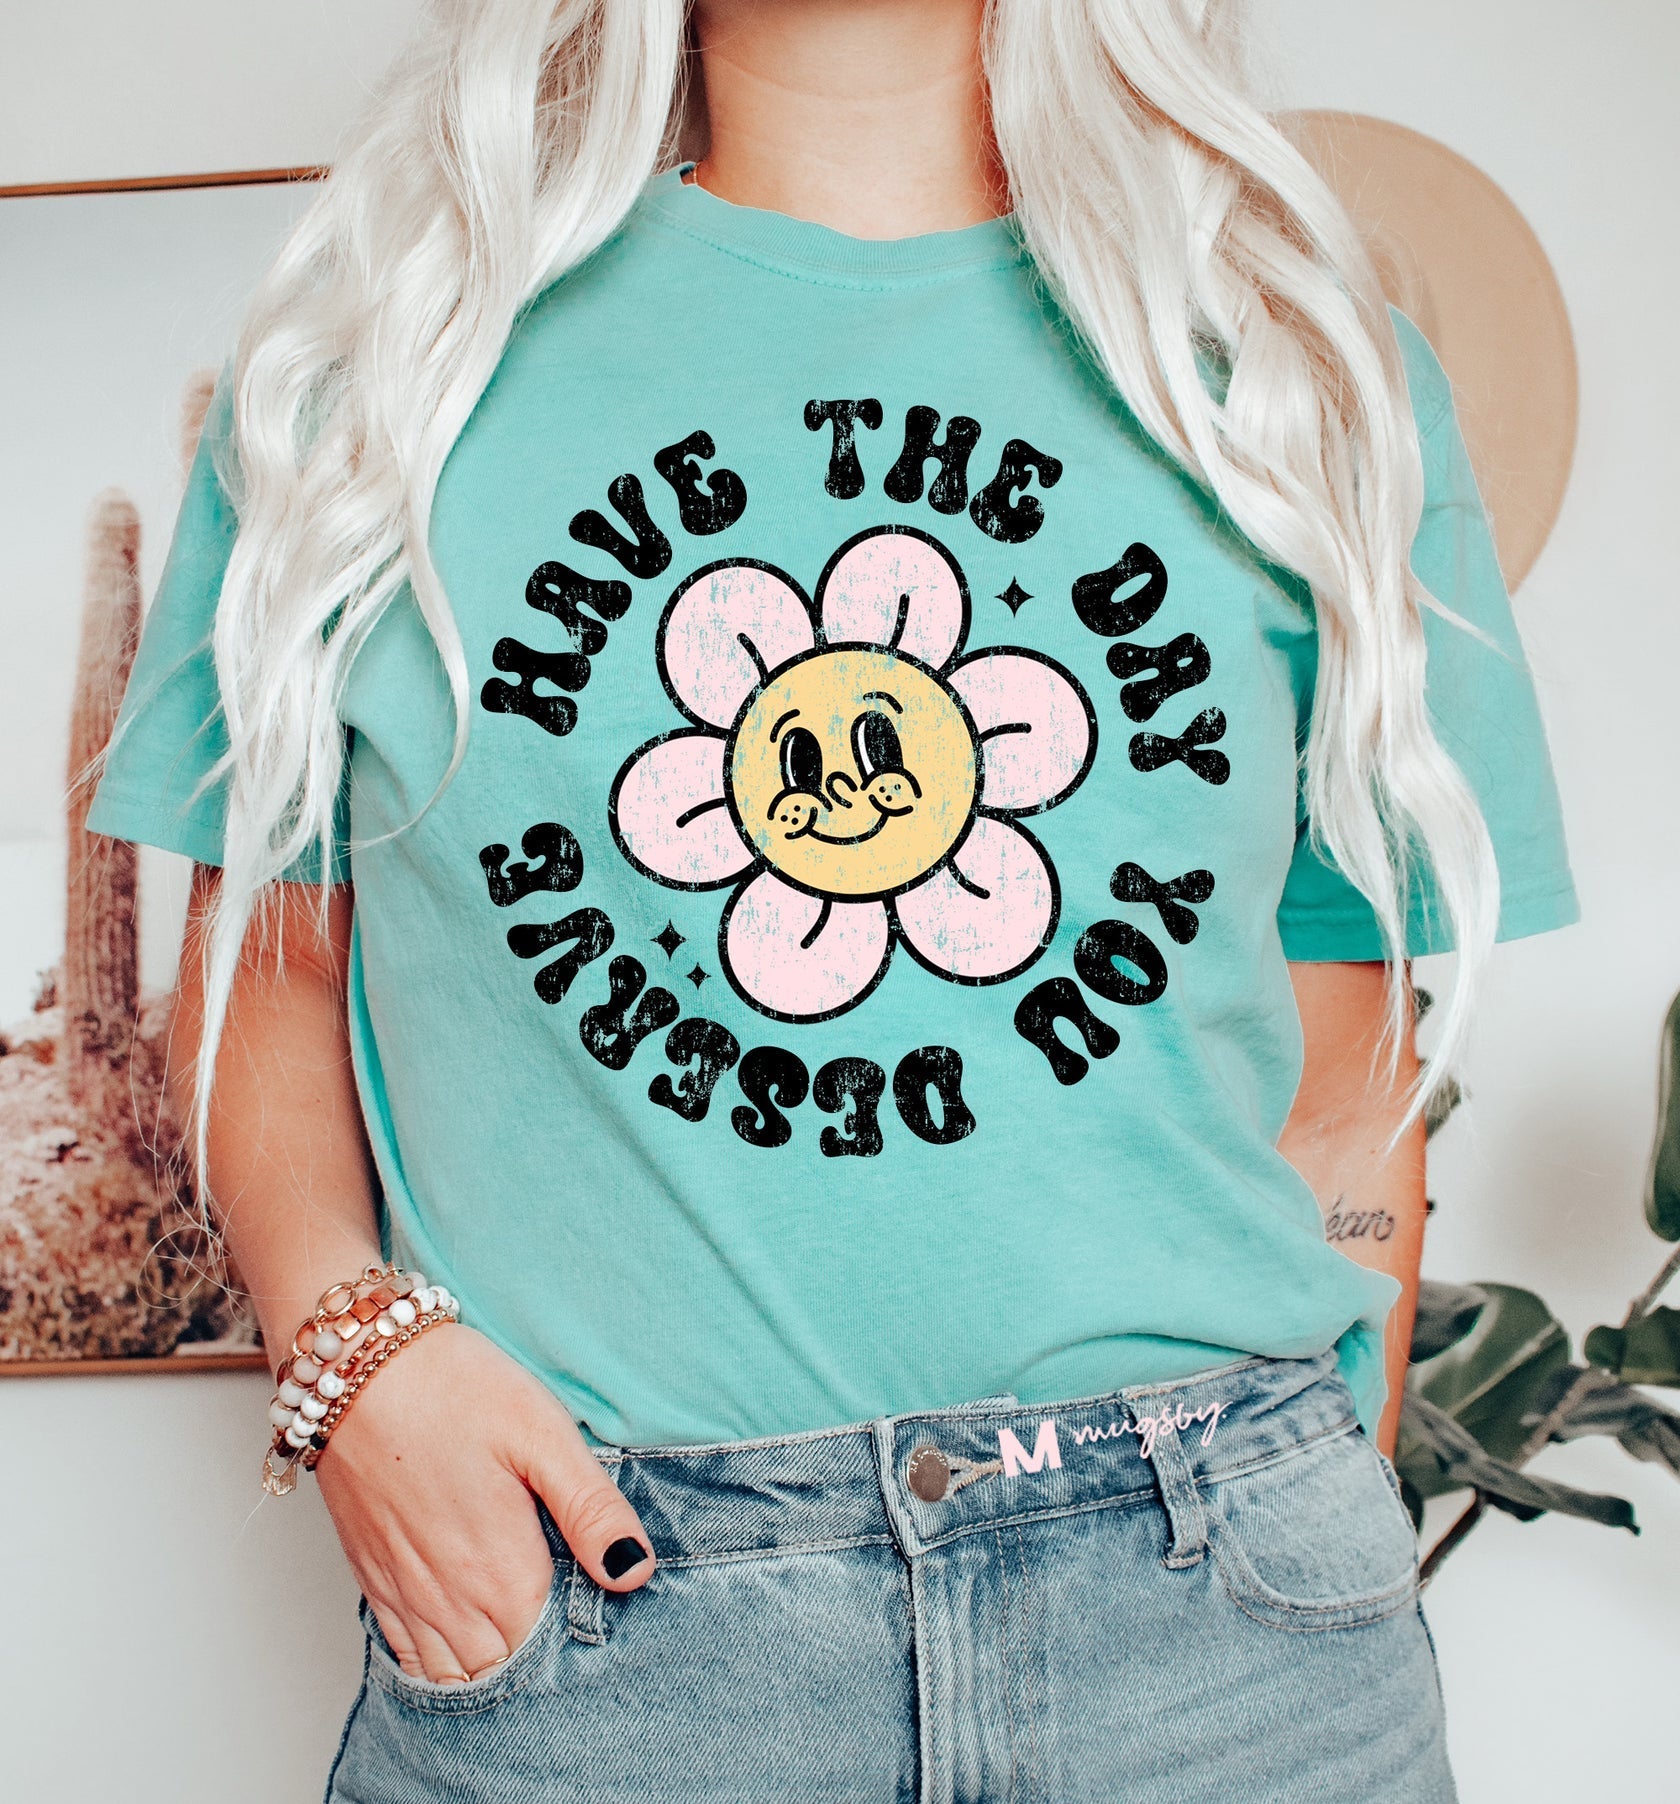 PREORDER: Have the Day You Deserve Graphic Shirt